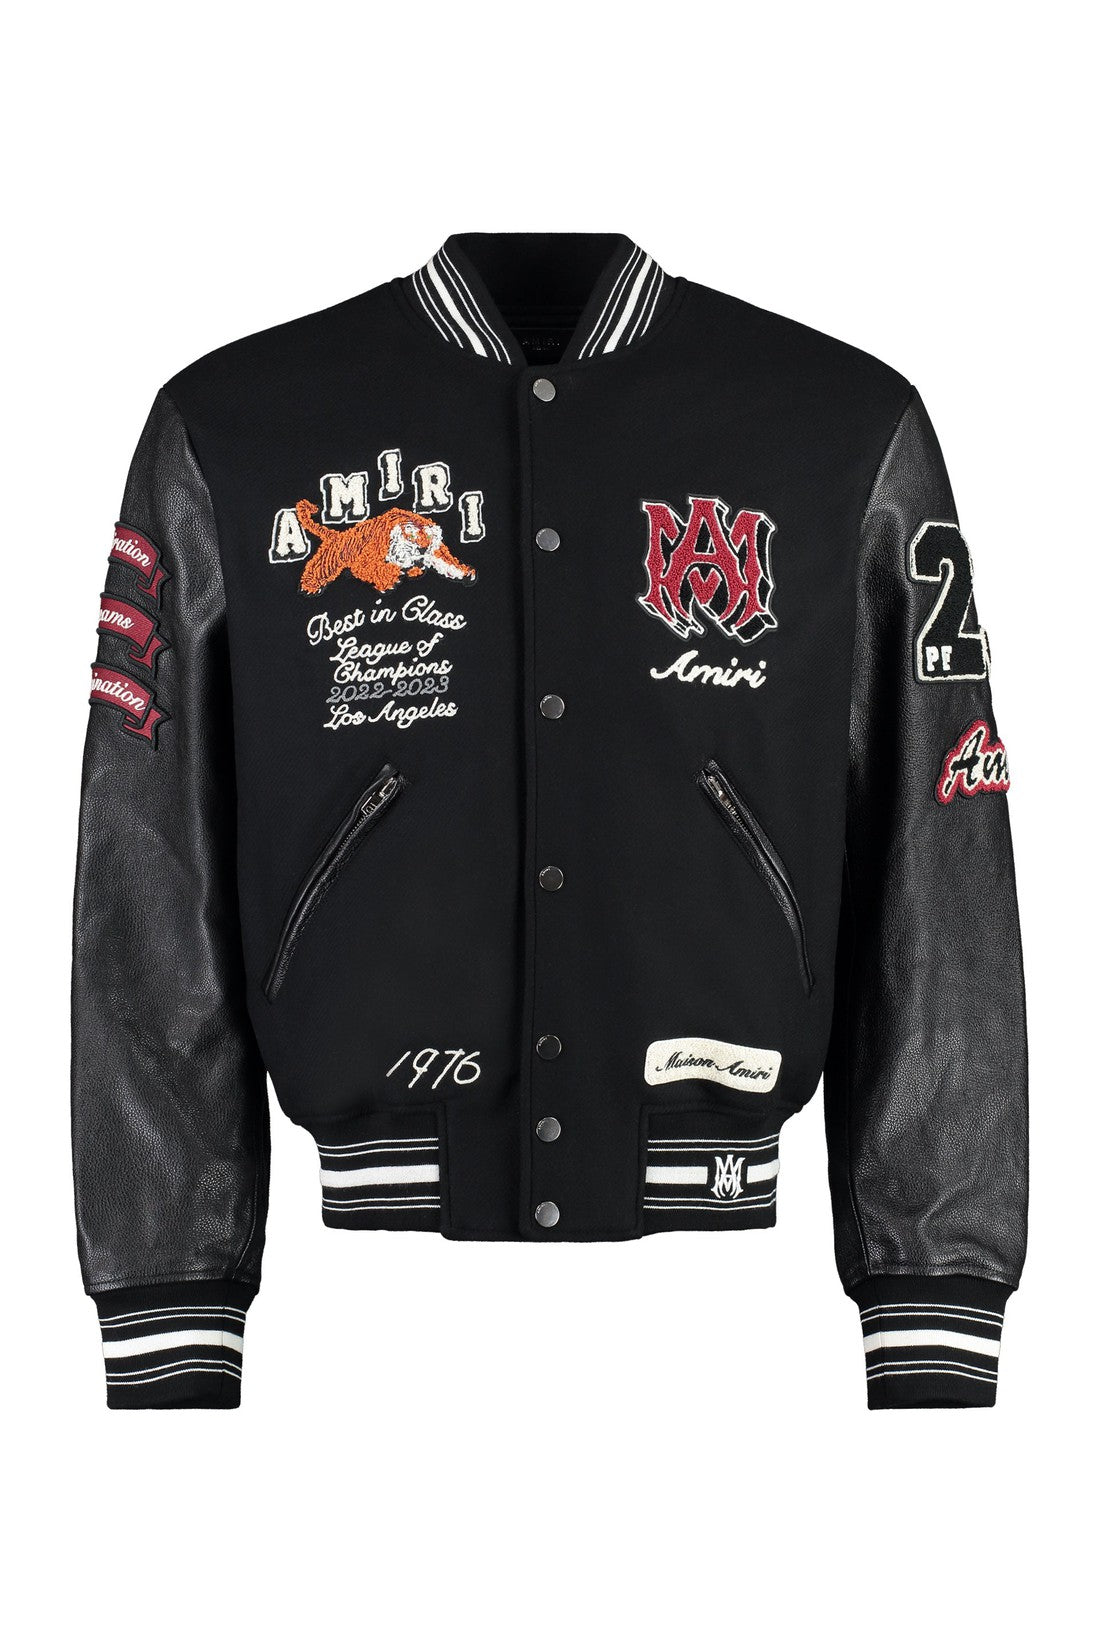 AMIRI-OUTLET-SALE-Wool bomber jacket with patches and leather sleeves-ARCHIVIST